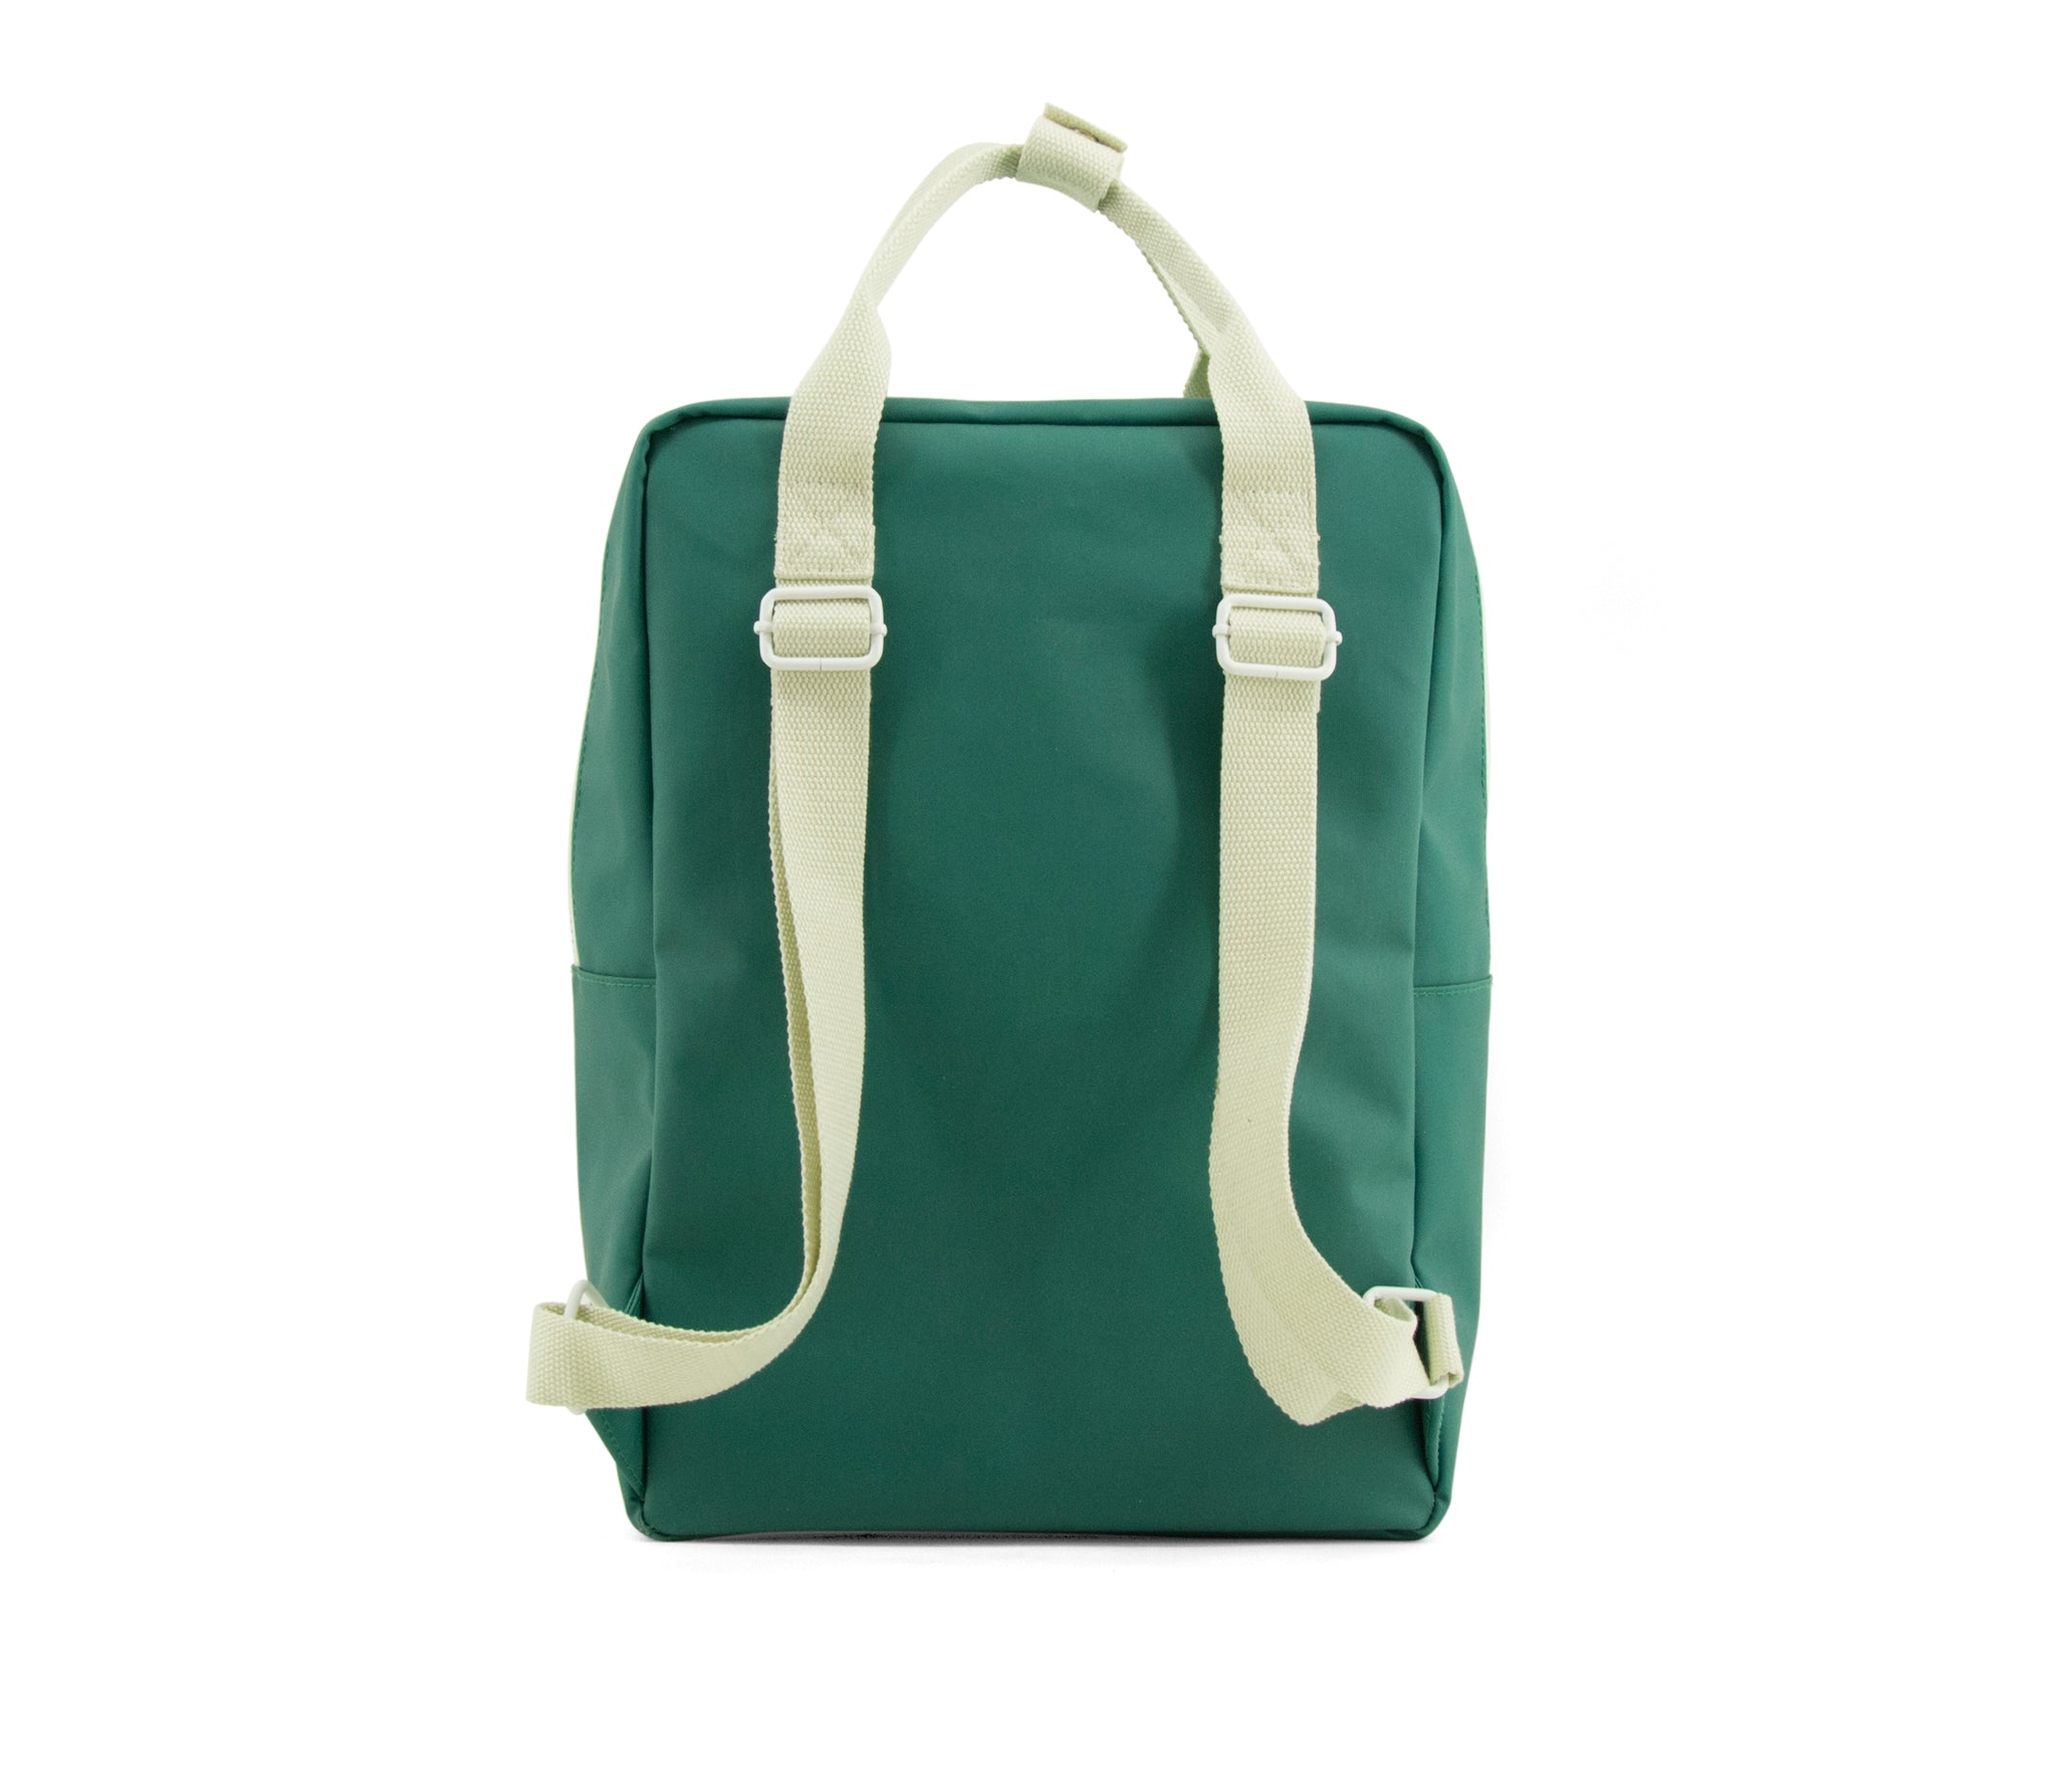 Sticky Lemon Large Backpack, Grass Green – Just Shoes for Kids